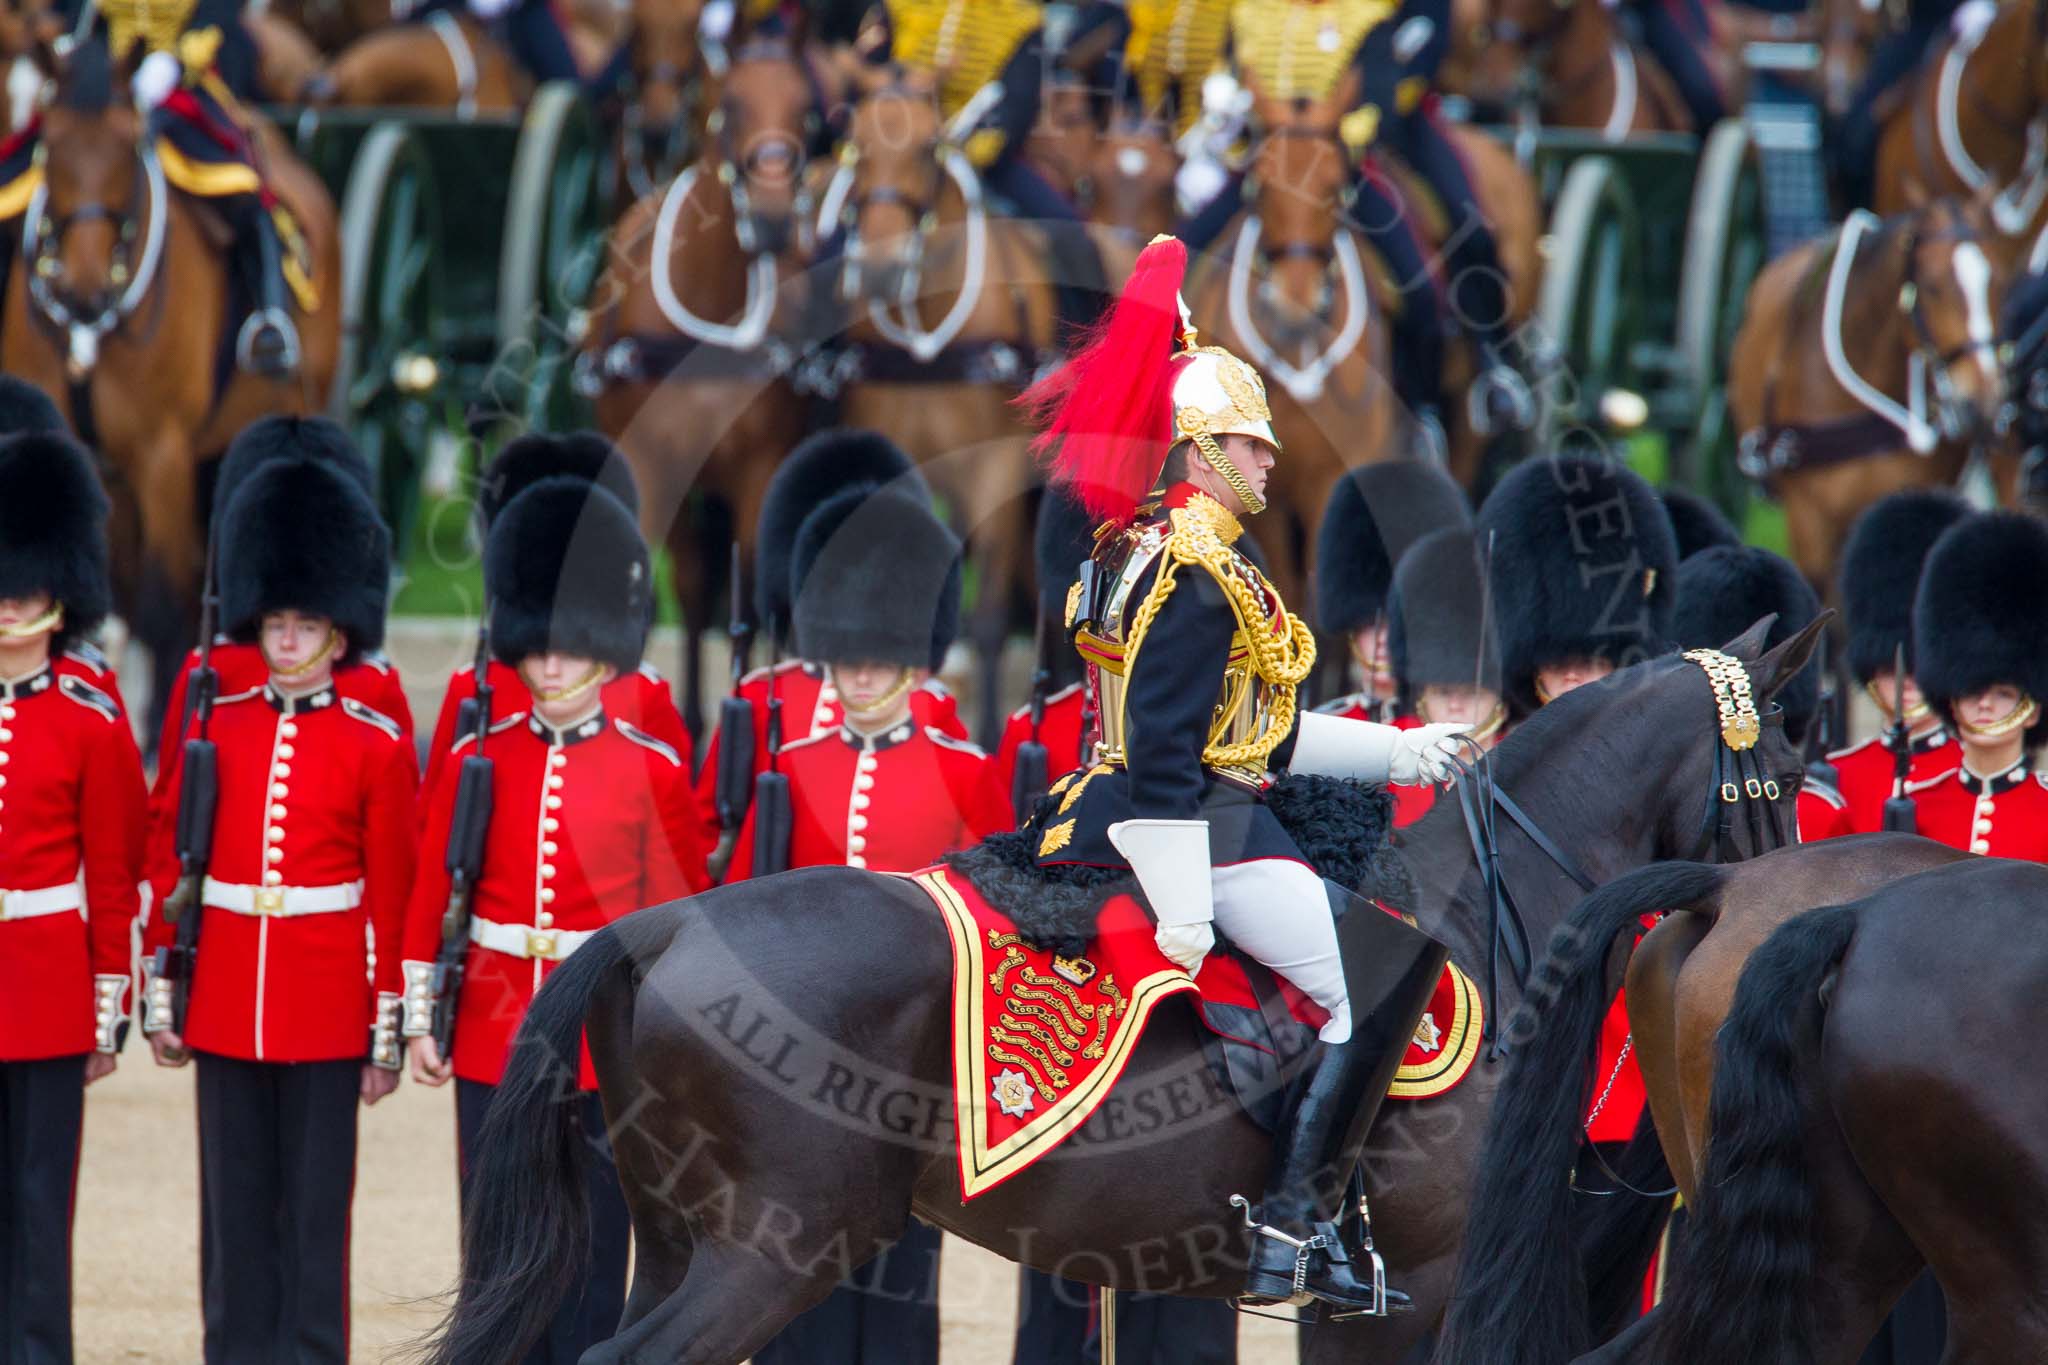 Trooping the Colour 2014.
Horse Guards Parade, Westminster,
London SW1A,

United Kingdom,
on 14 June 2014 at 11:04, image #407